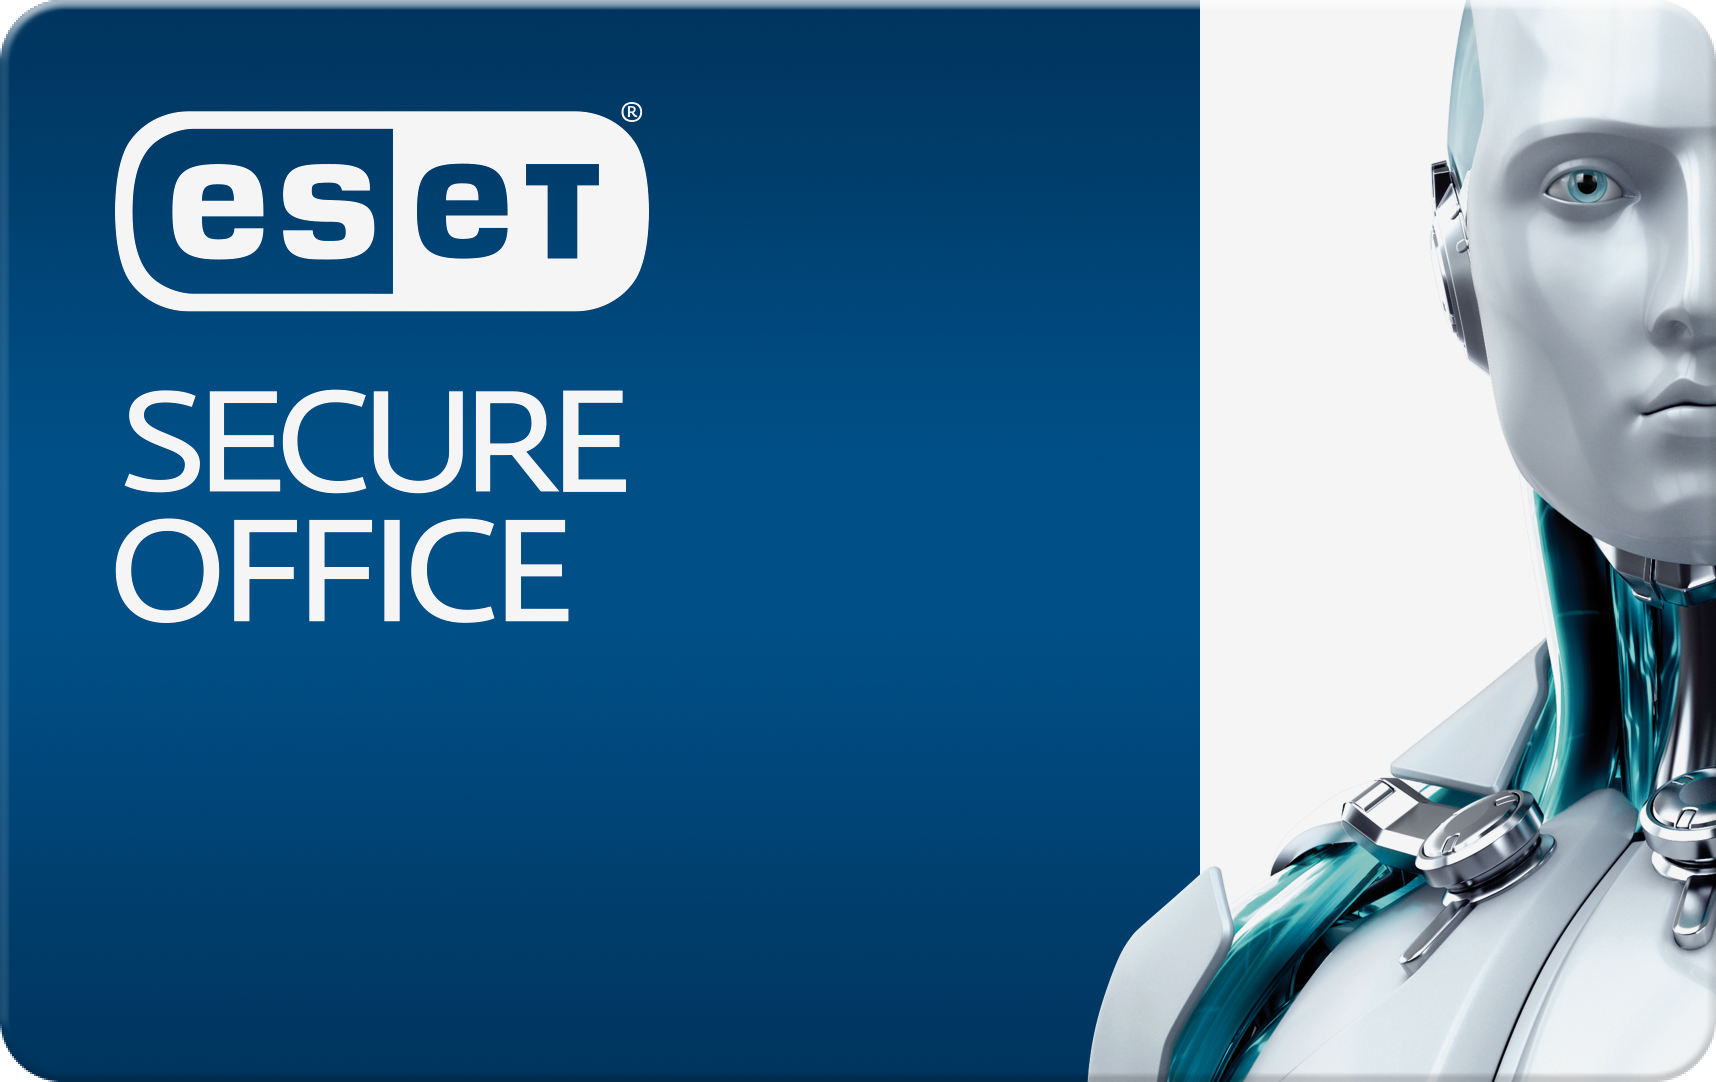 card---eset-secure-office.png